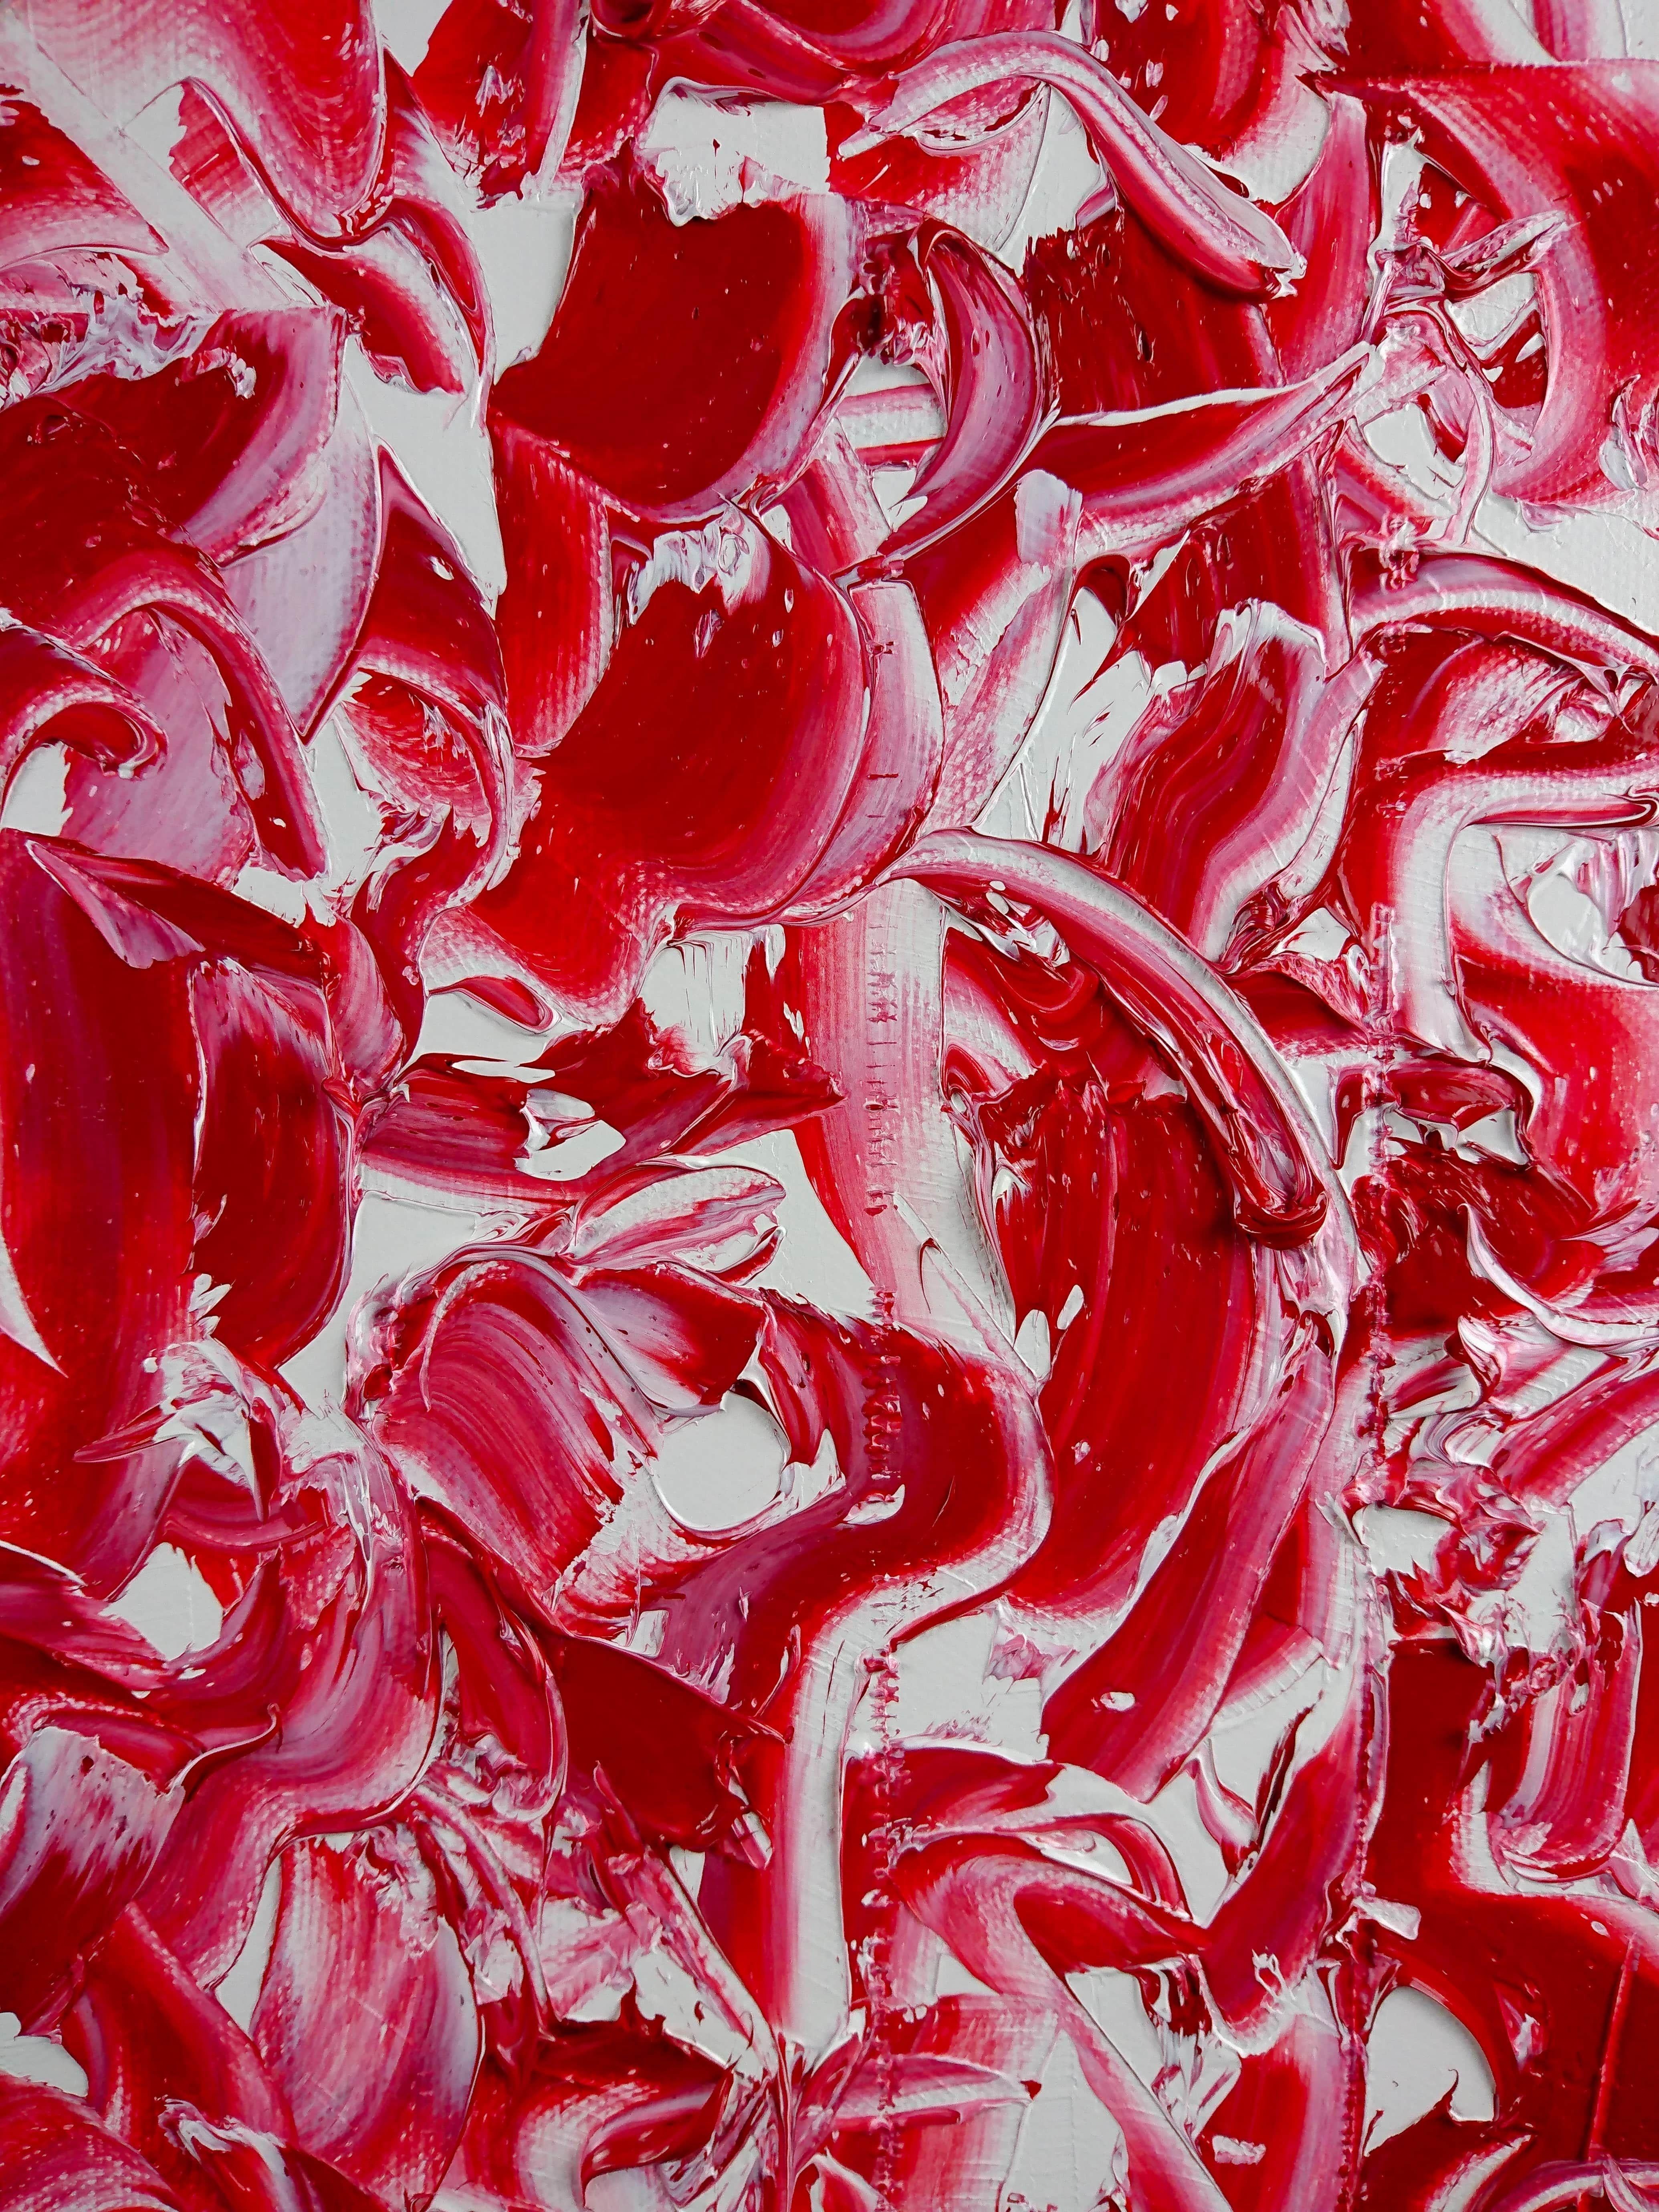 Do you want to love him forever?, Painting, Oil on Canvas - Red Abstract Painting by Jacqueline Dey